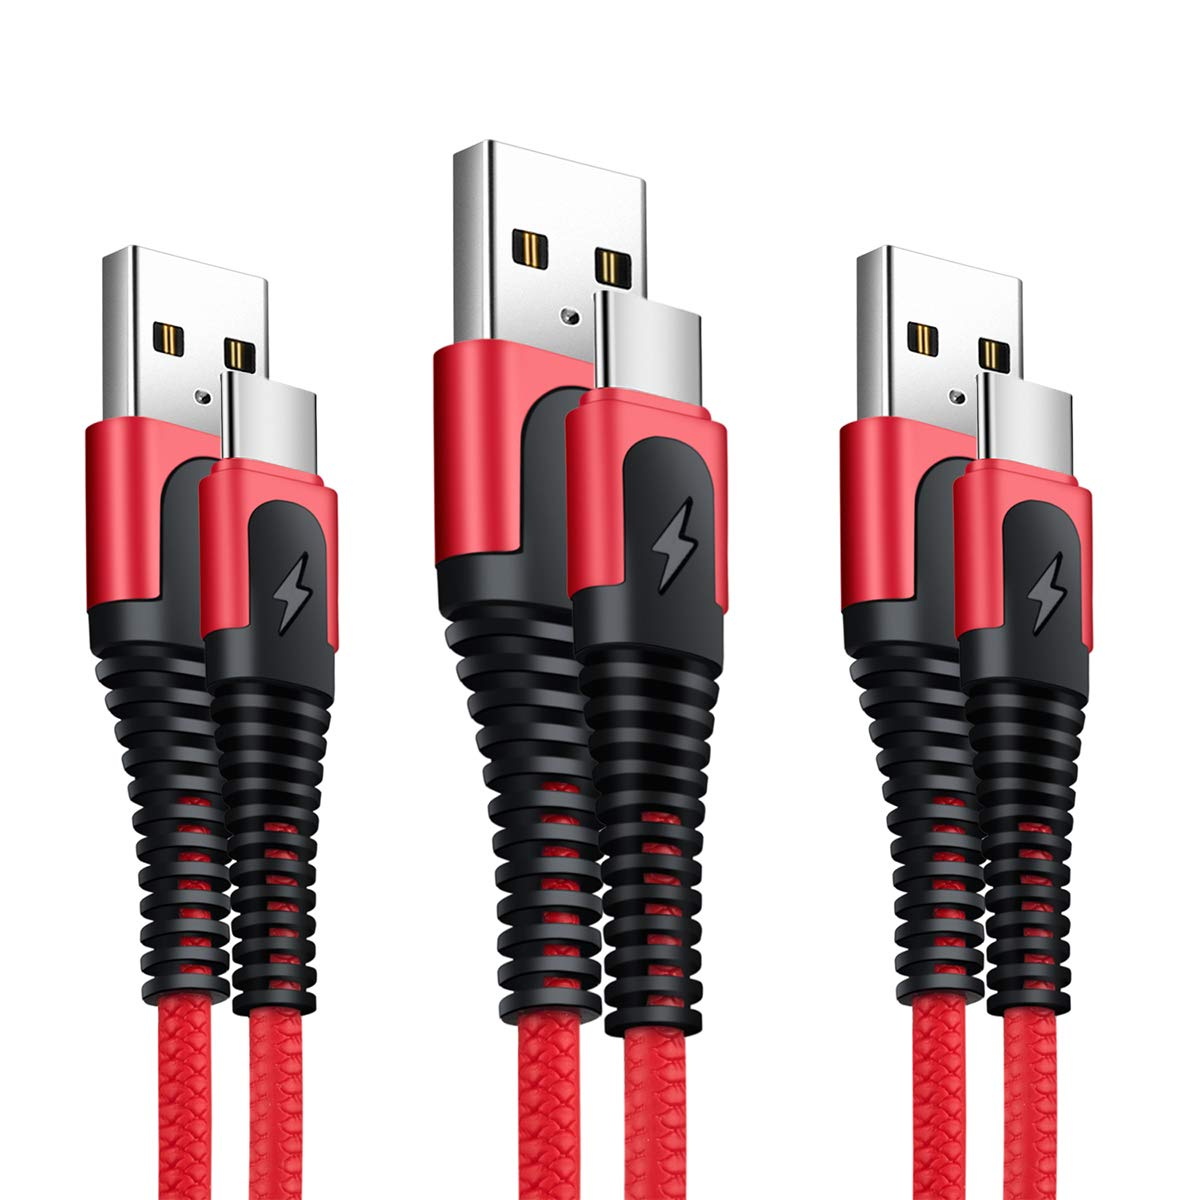 3 Pack [3+3+6.6Ft] USB C Cable, Type C Cable Fast Charger Leads USB-C Charging Cable Compatible with Samsung Galaxy S10 /S9+ /S9 /S8 /S8+,Note 9/8,Huawei P30 /P20 /Mate20 /P10,Oneplus